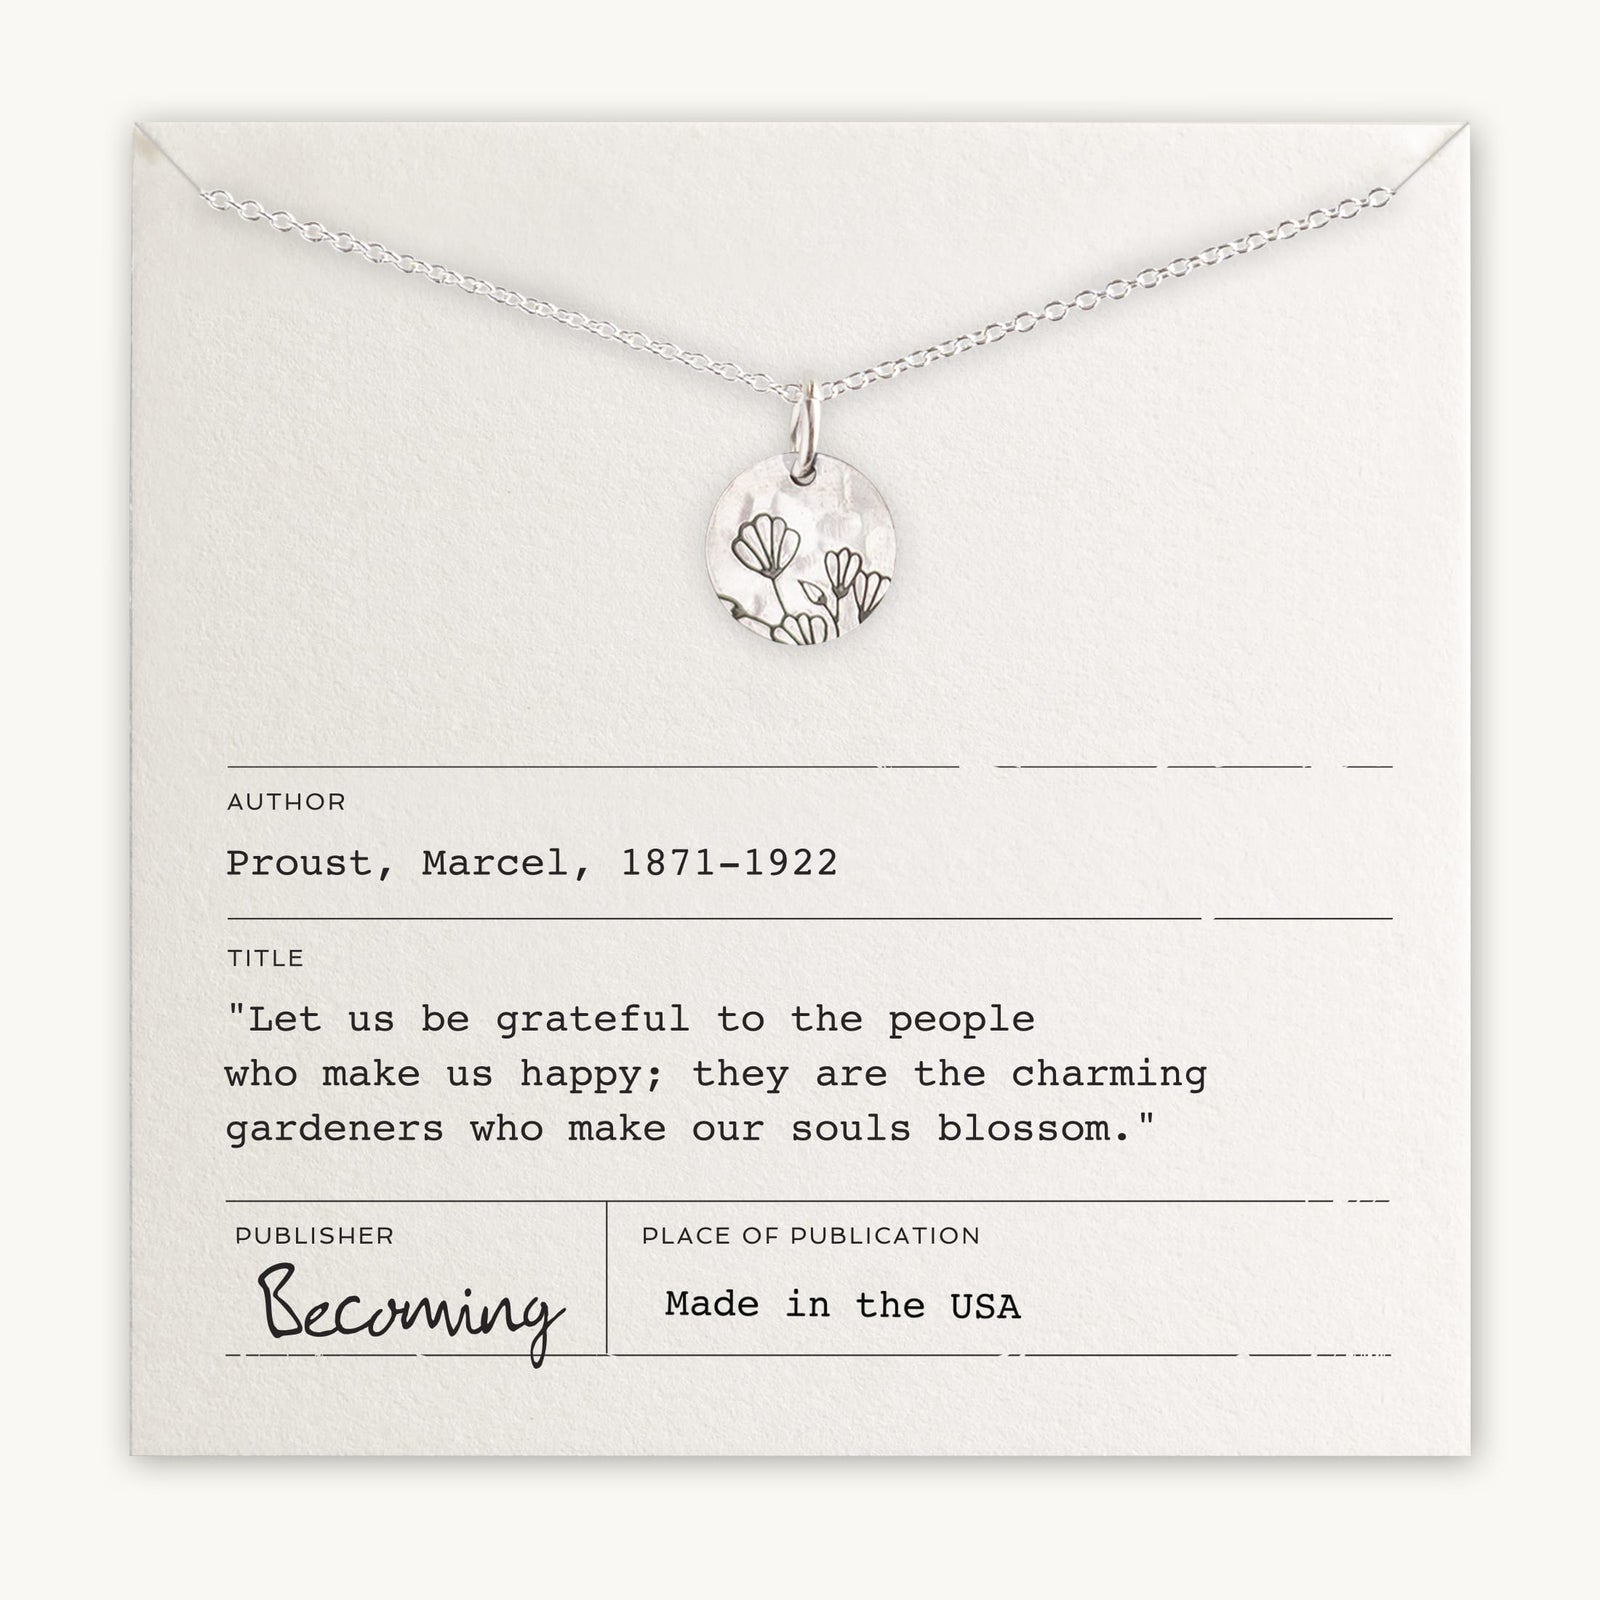 Becoming Jewelry's Blossom Necklace with a tree pendant on a card with a Marcel Proust quote about gratitude and happiness.